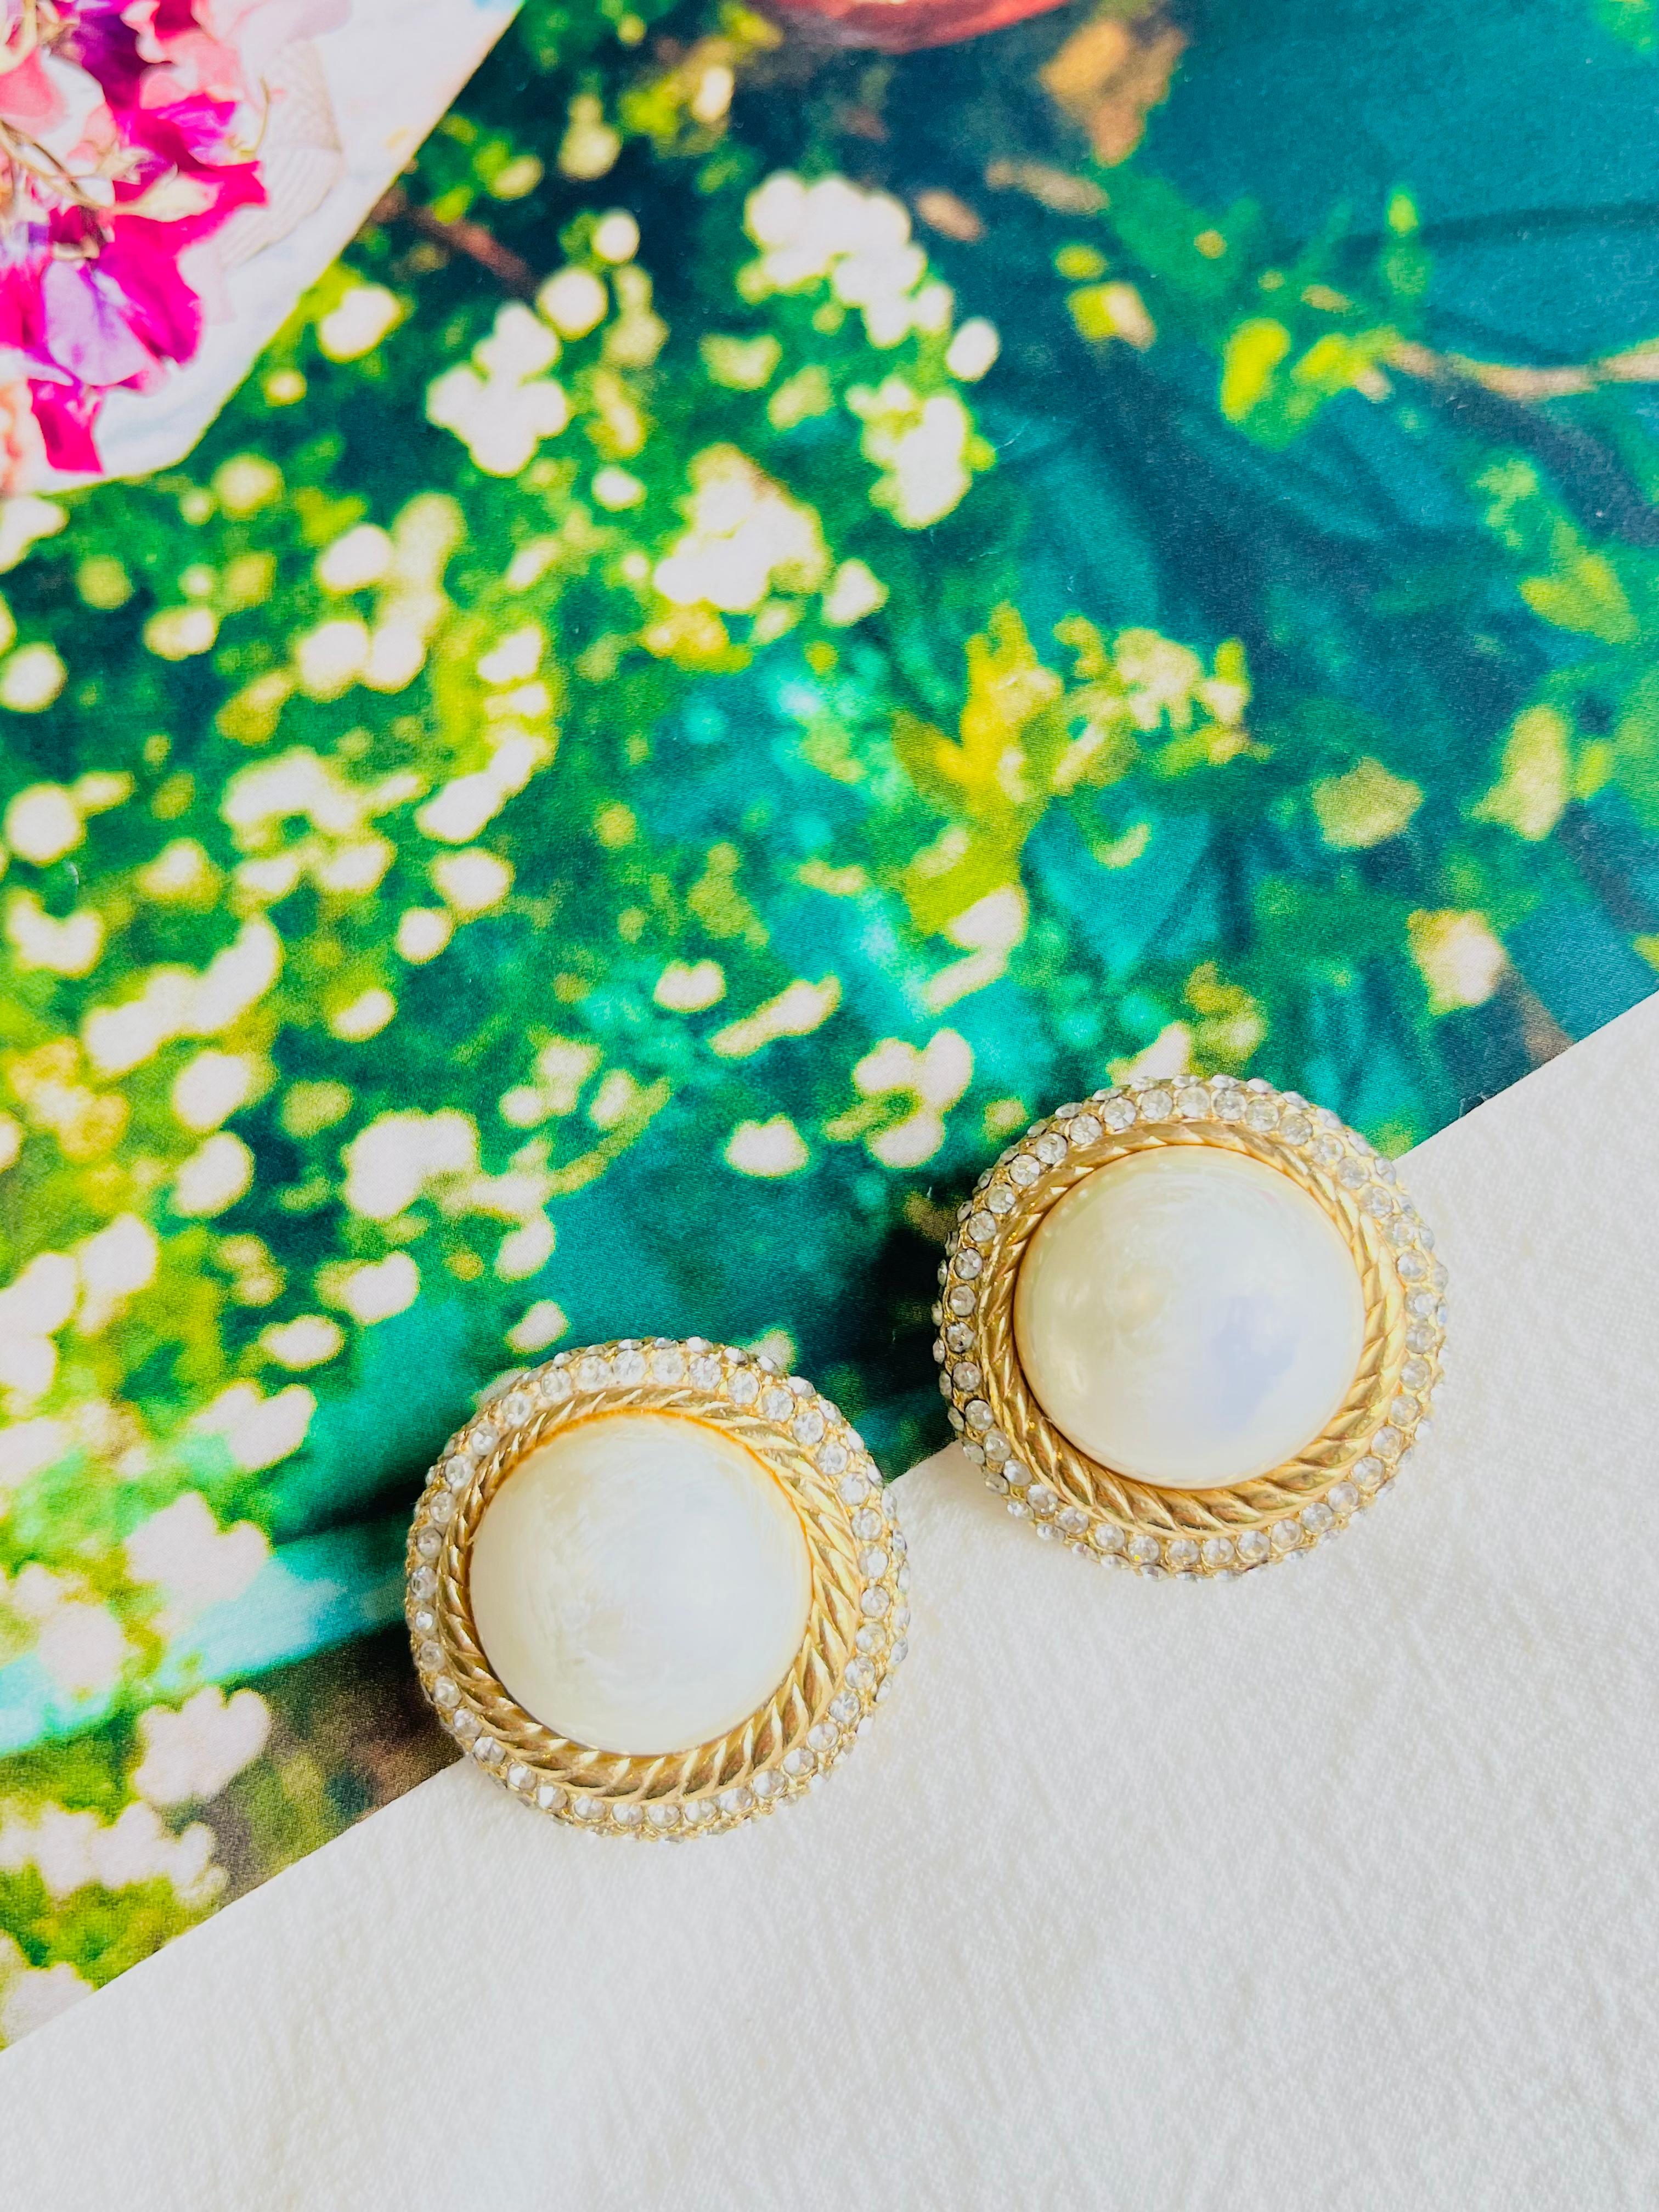 Good condition. Peeled off on faux pearls. Not any stones lost.

100% Genuine. Vintage and rare to find.

A very beautiful pair of earrings by Chr. DIOR, signed at the back.

Size: 3.0*3.0 cm.

Weight: 18.0 g/each.

_ _ _

Great for everyday wear.